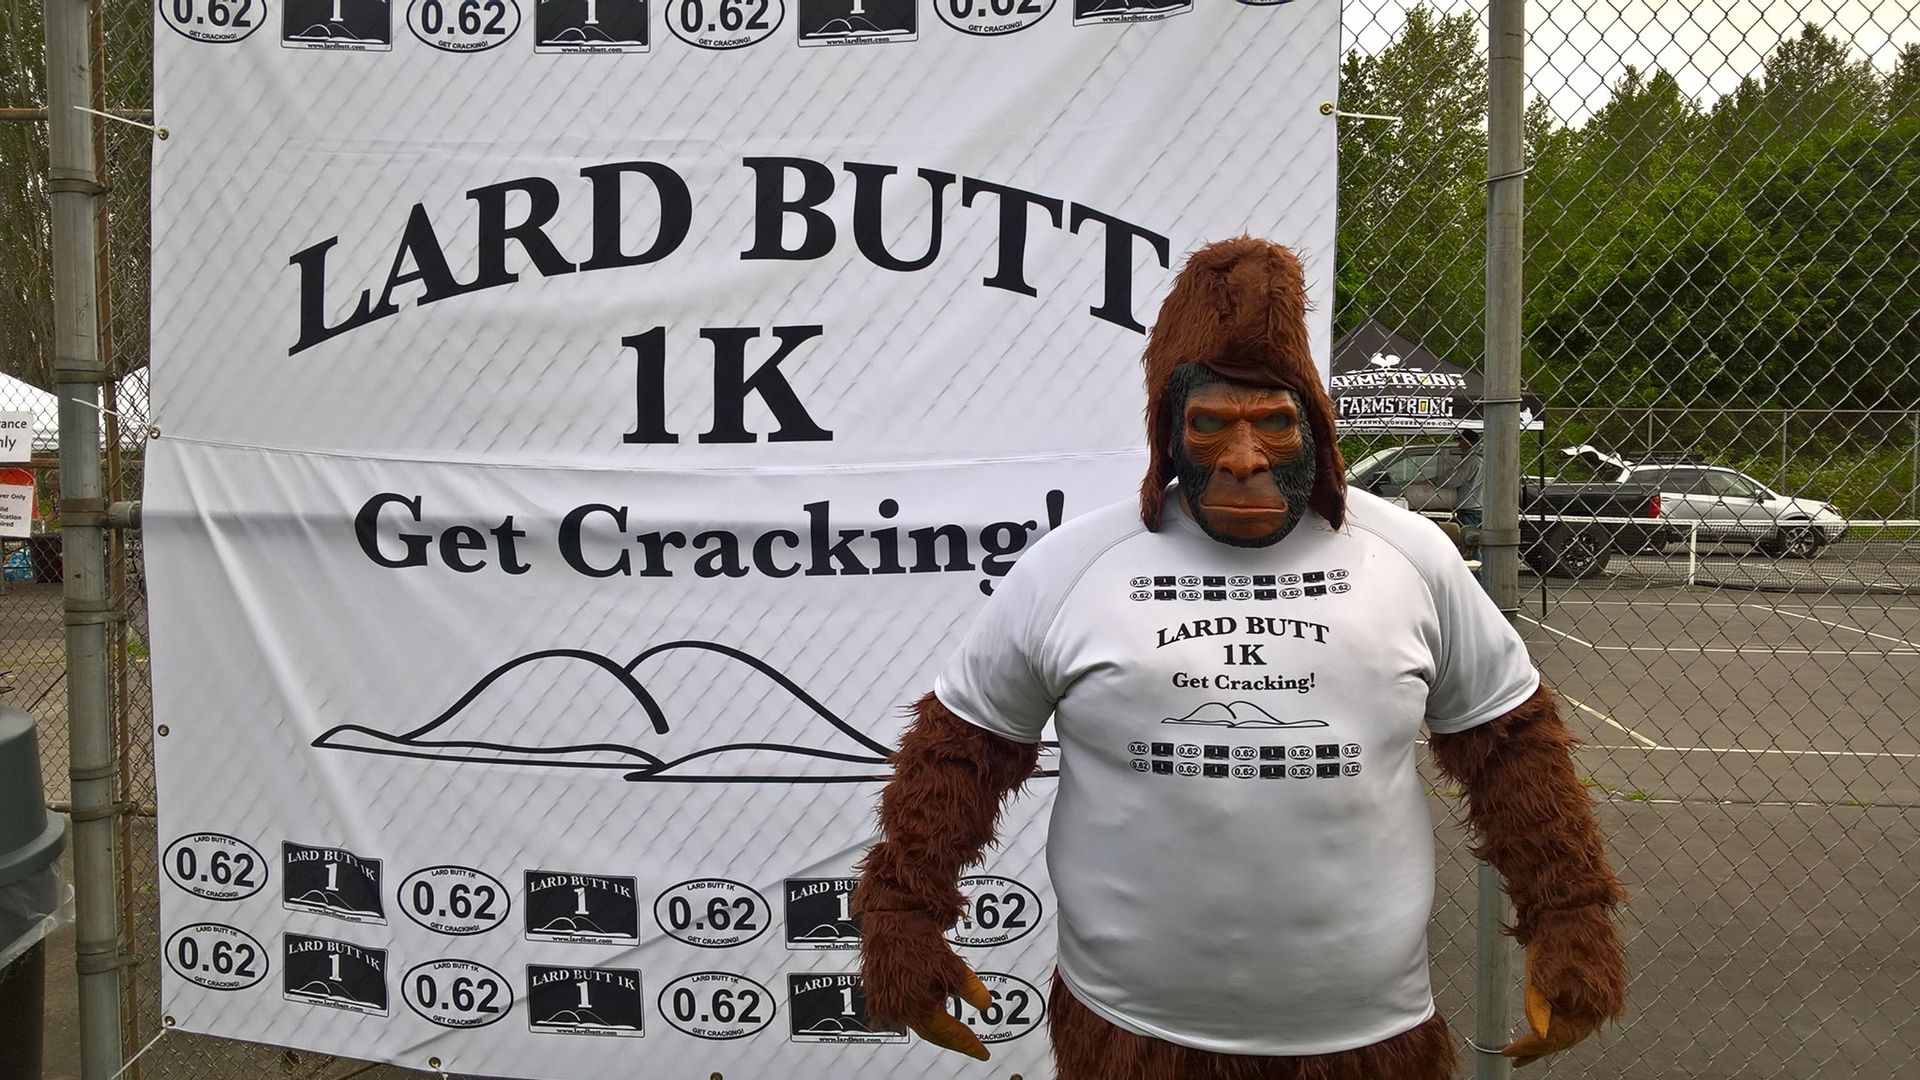 A person dressed up as a sasquatch in front of an poster for an upcoming 1k run.